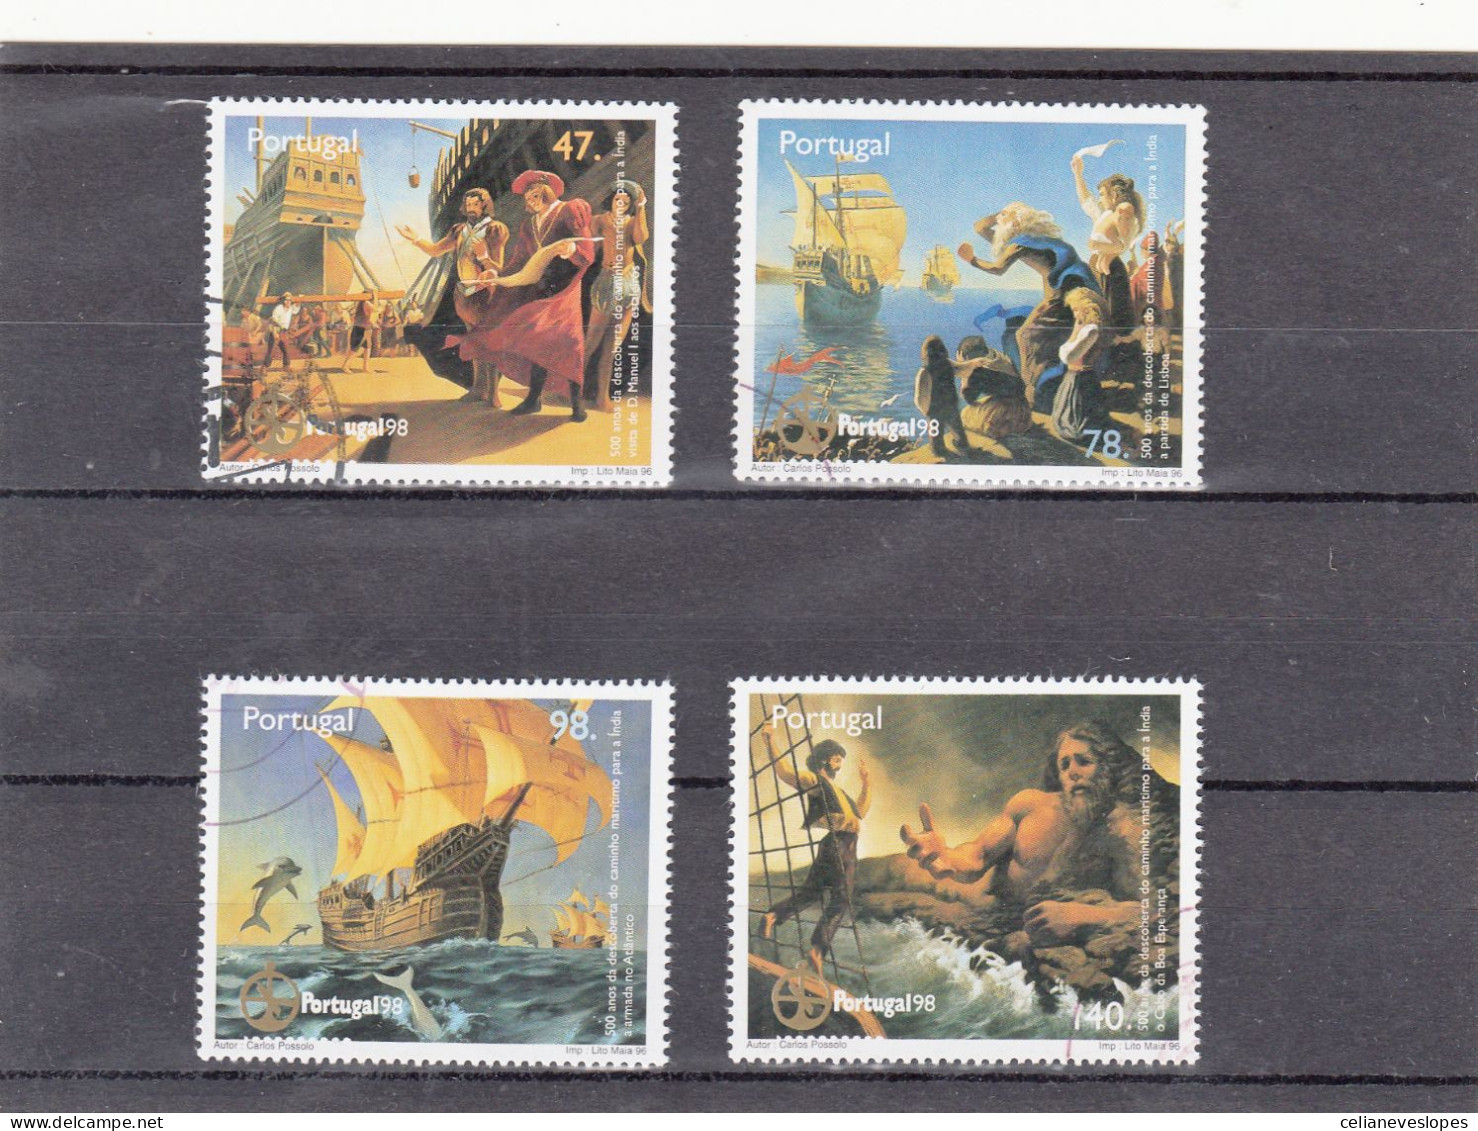 Portugal, Caminho Maritimo Para A India, 1996, Mundifil Nº 2382 A 2385 Used - Used Stamps